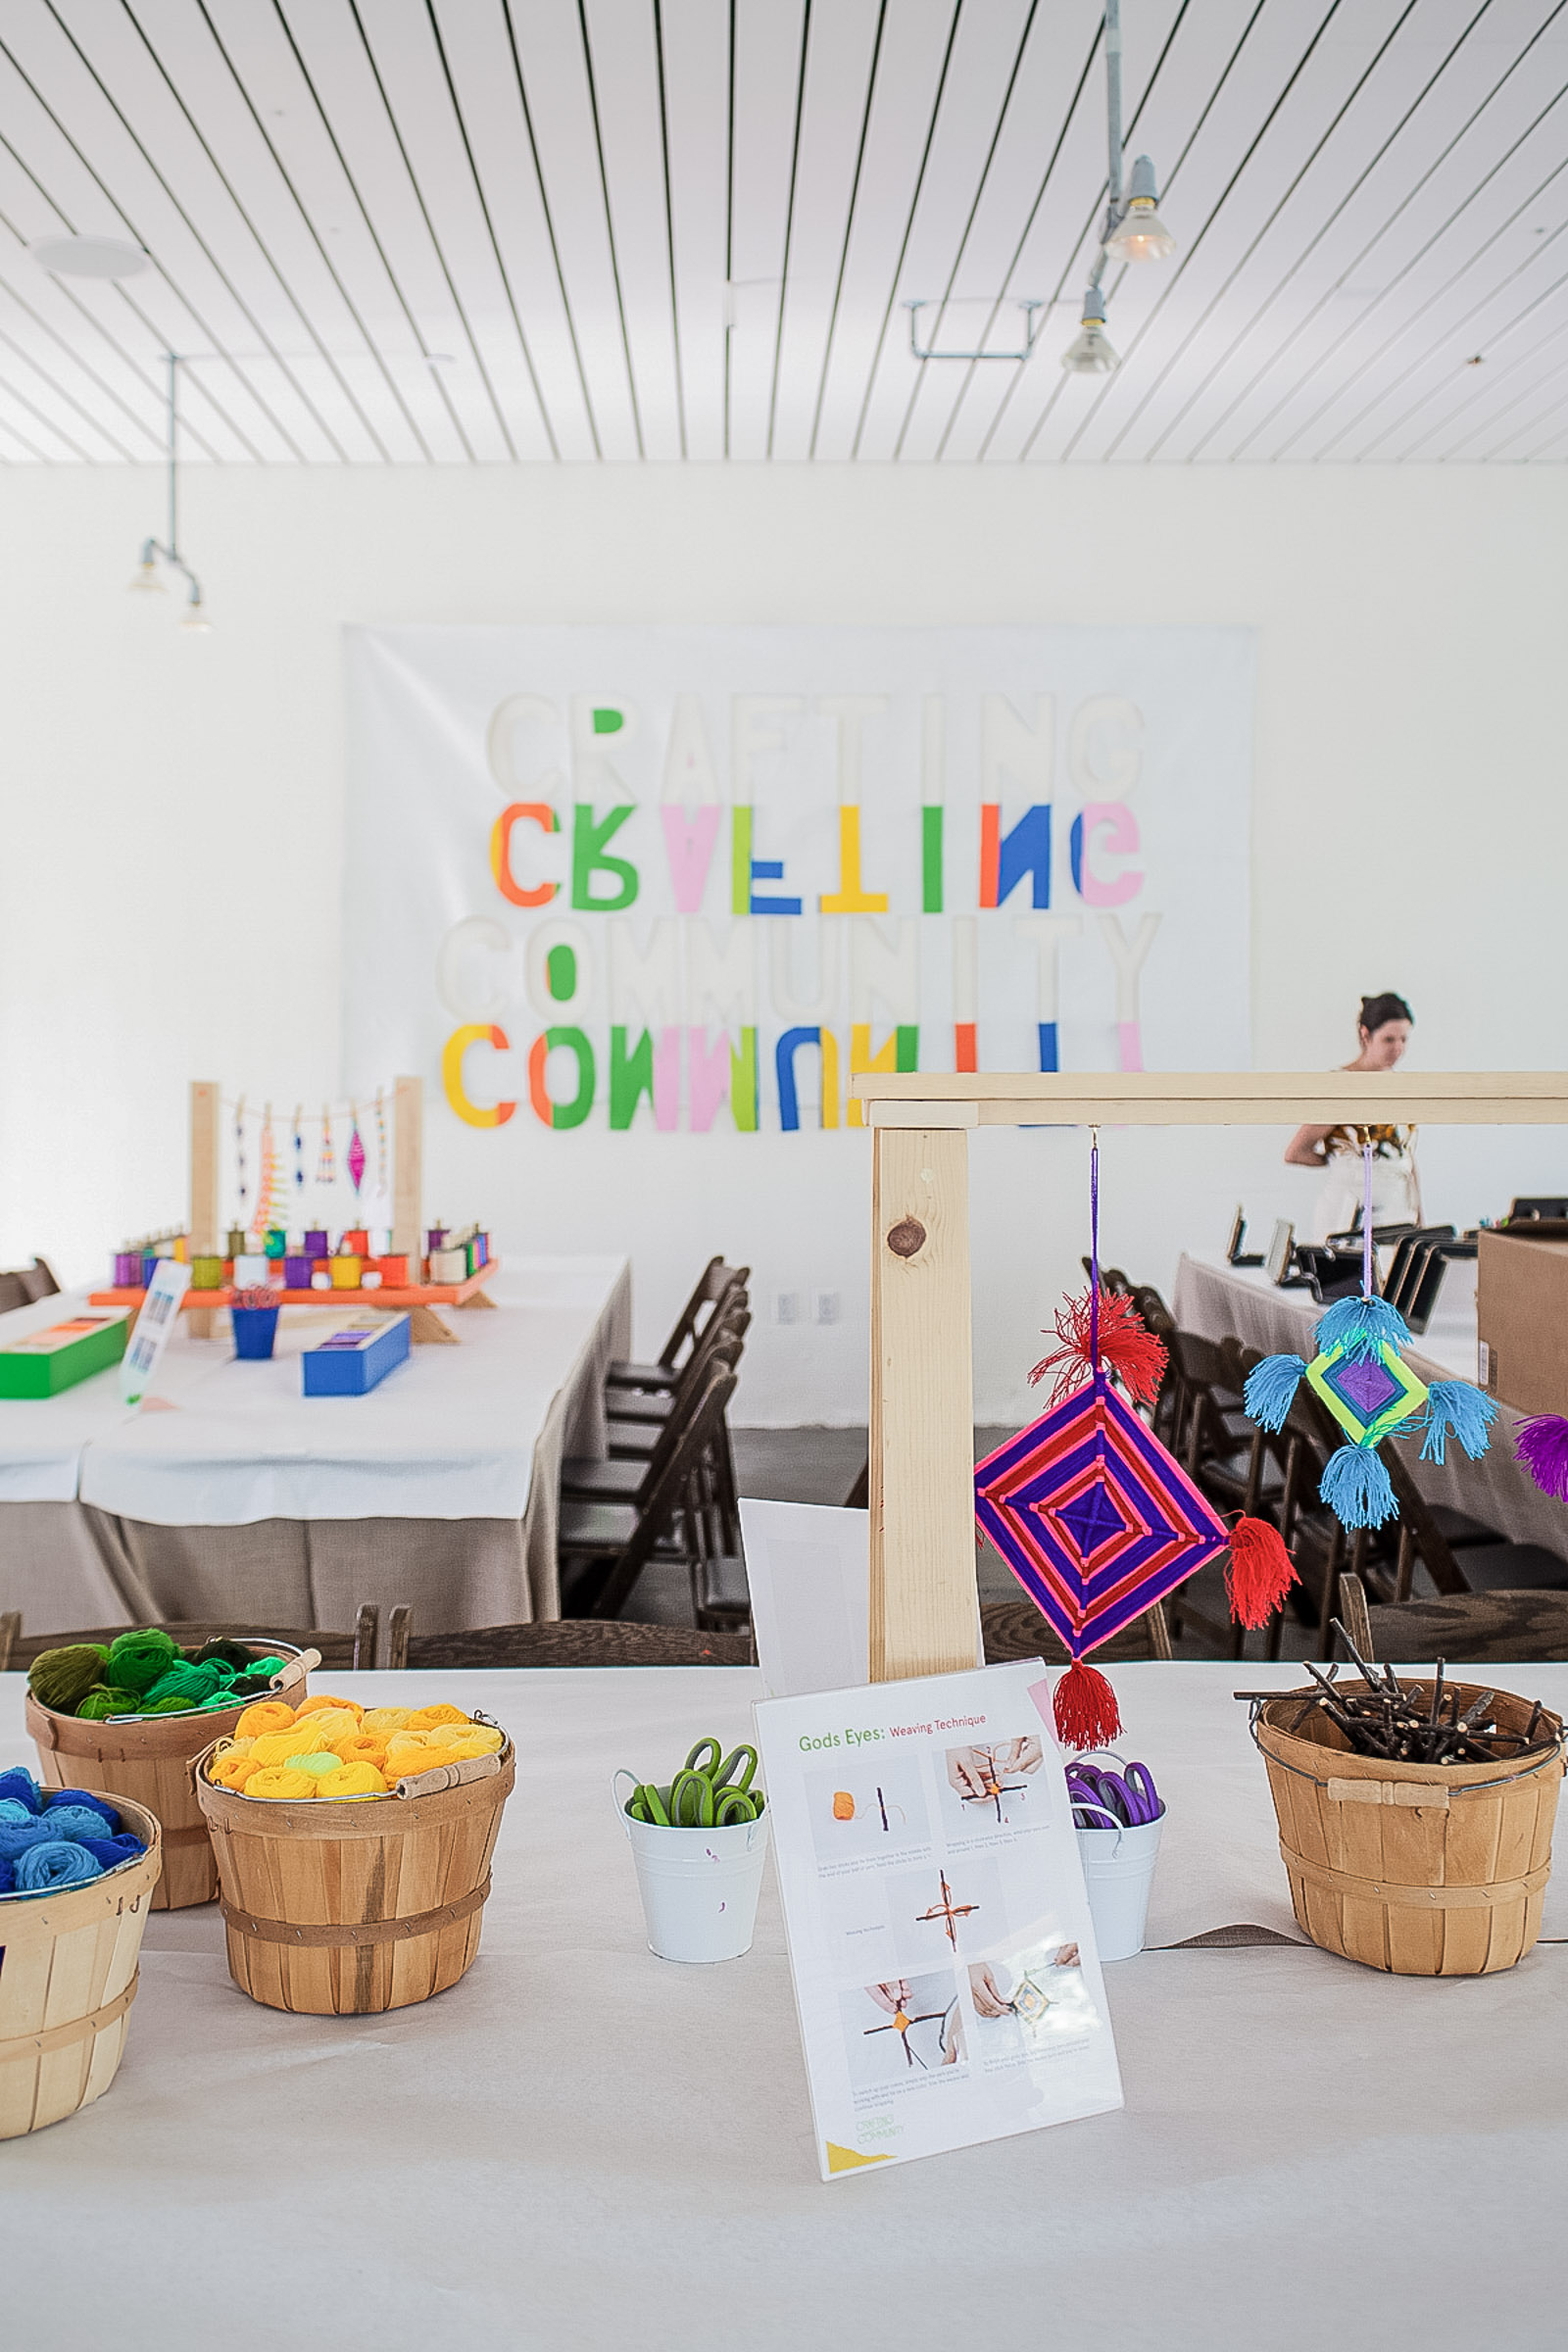 Crafting Community at the Ace Hotel